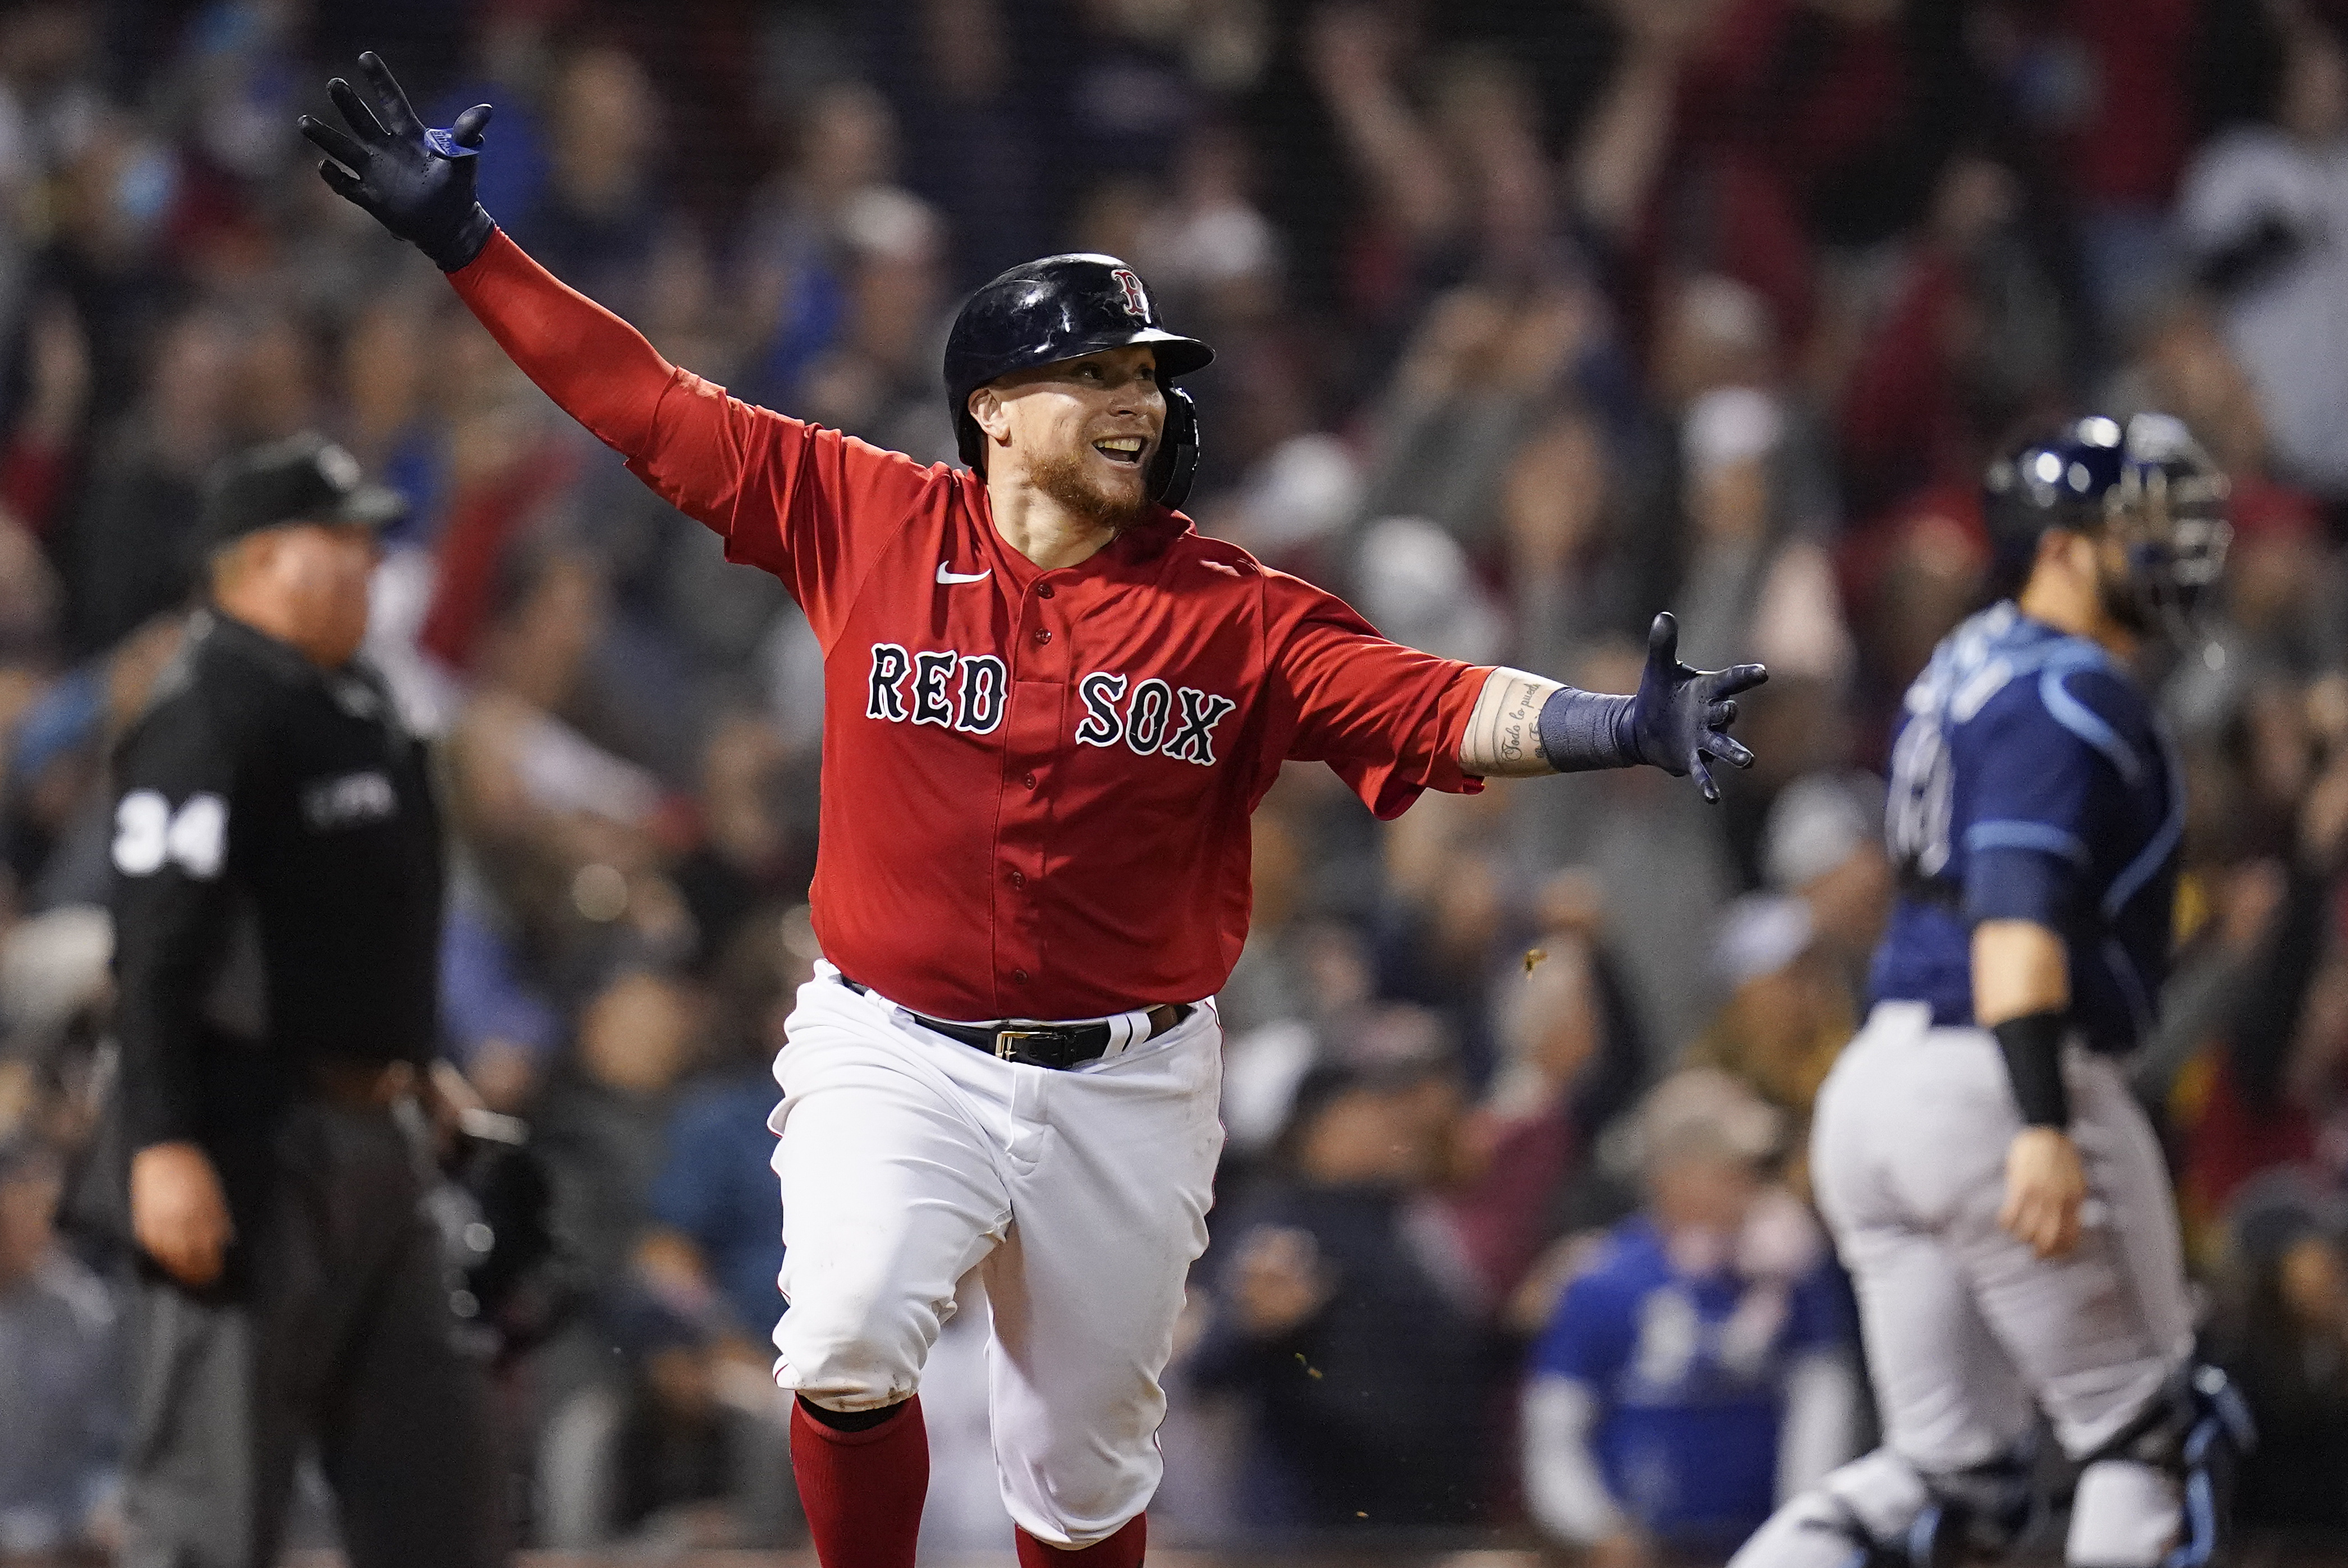 Christian Vazquez Walk-Off HR Gives Red Sox Win over Rays in Game